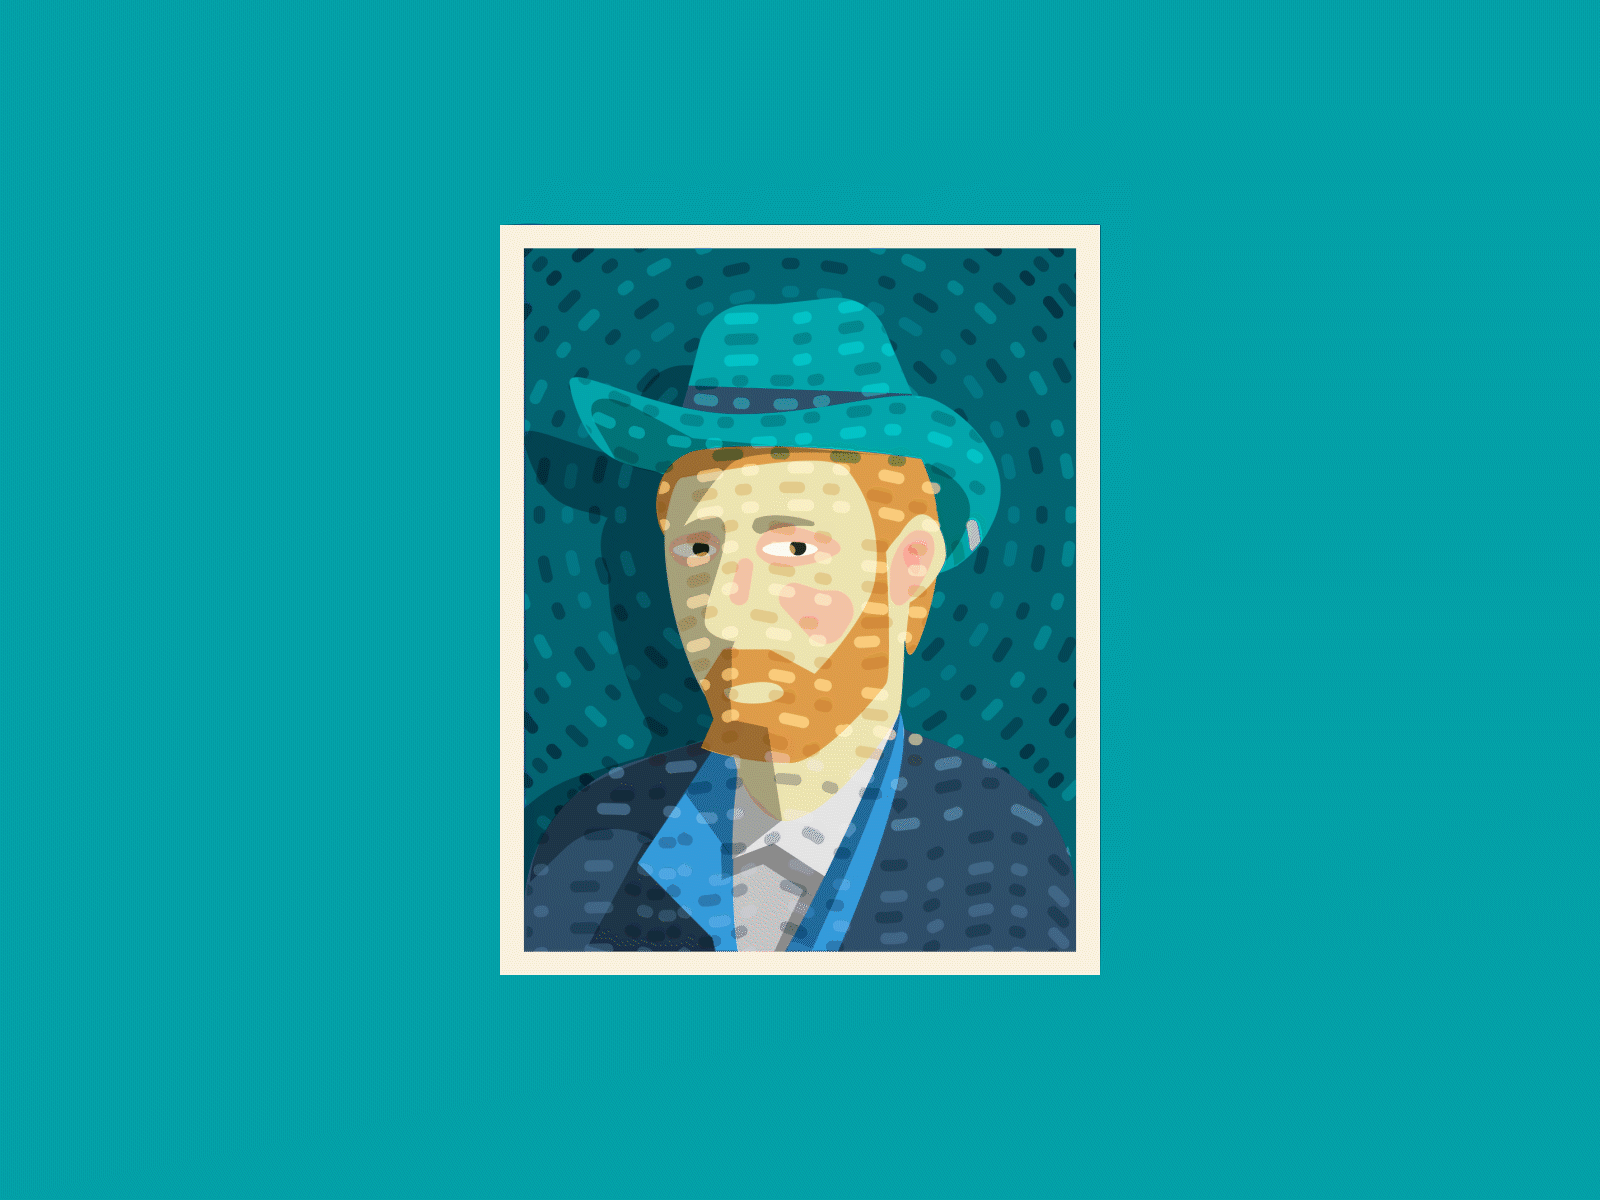 Vincent Van Gogh / Made in Figma